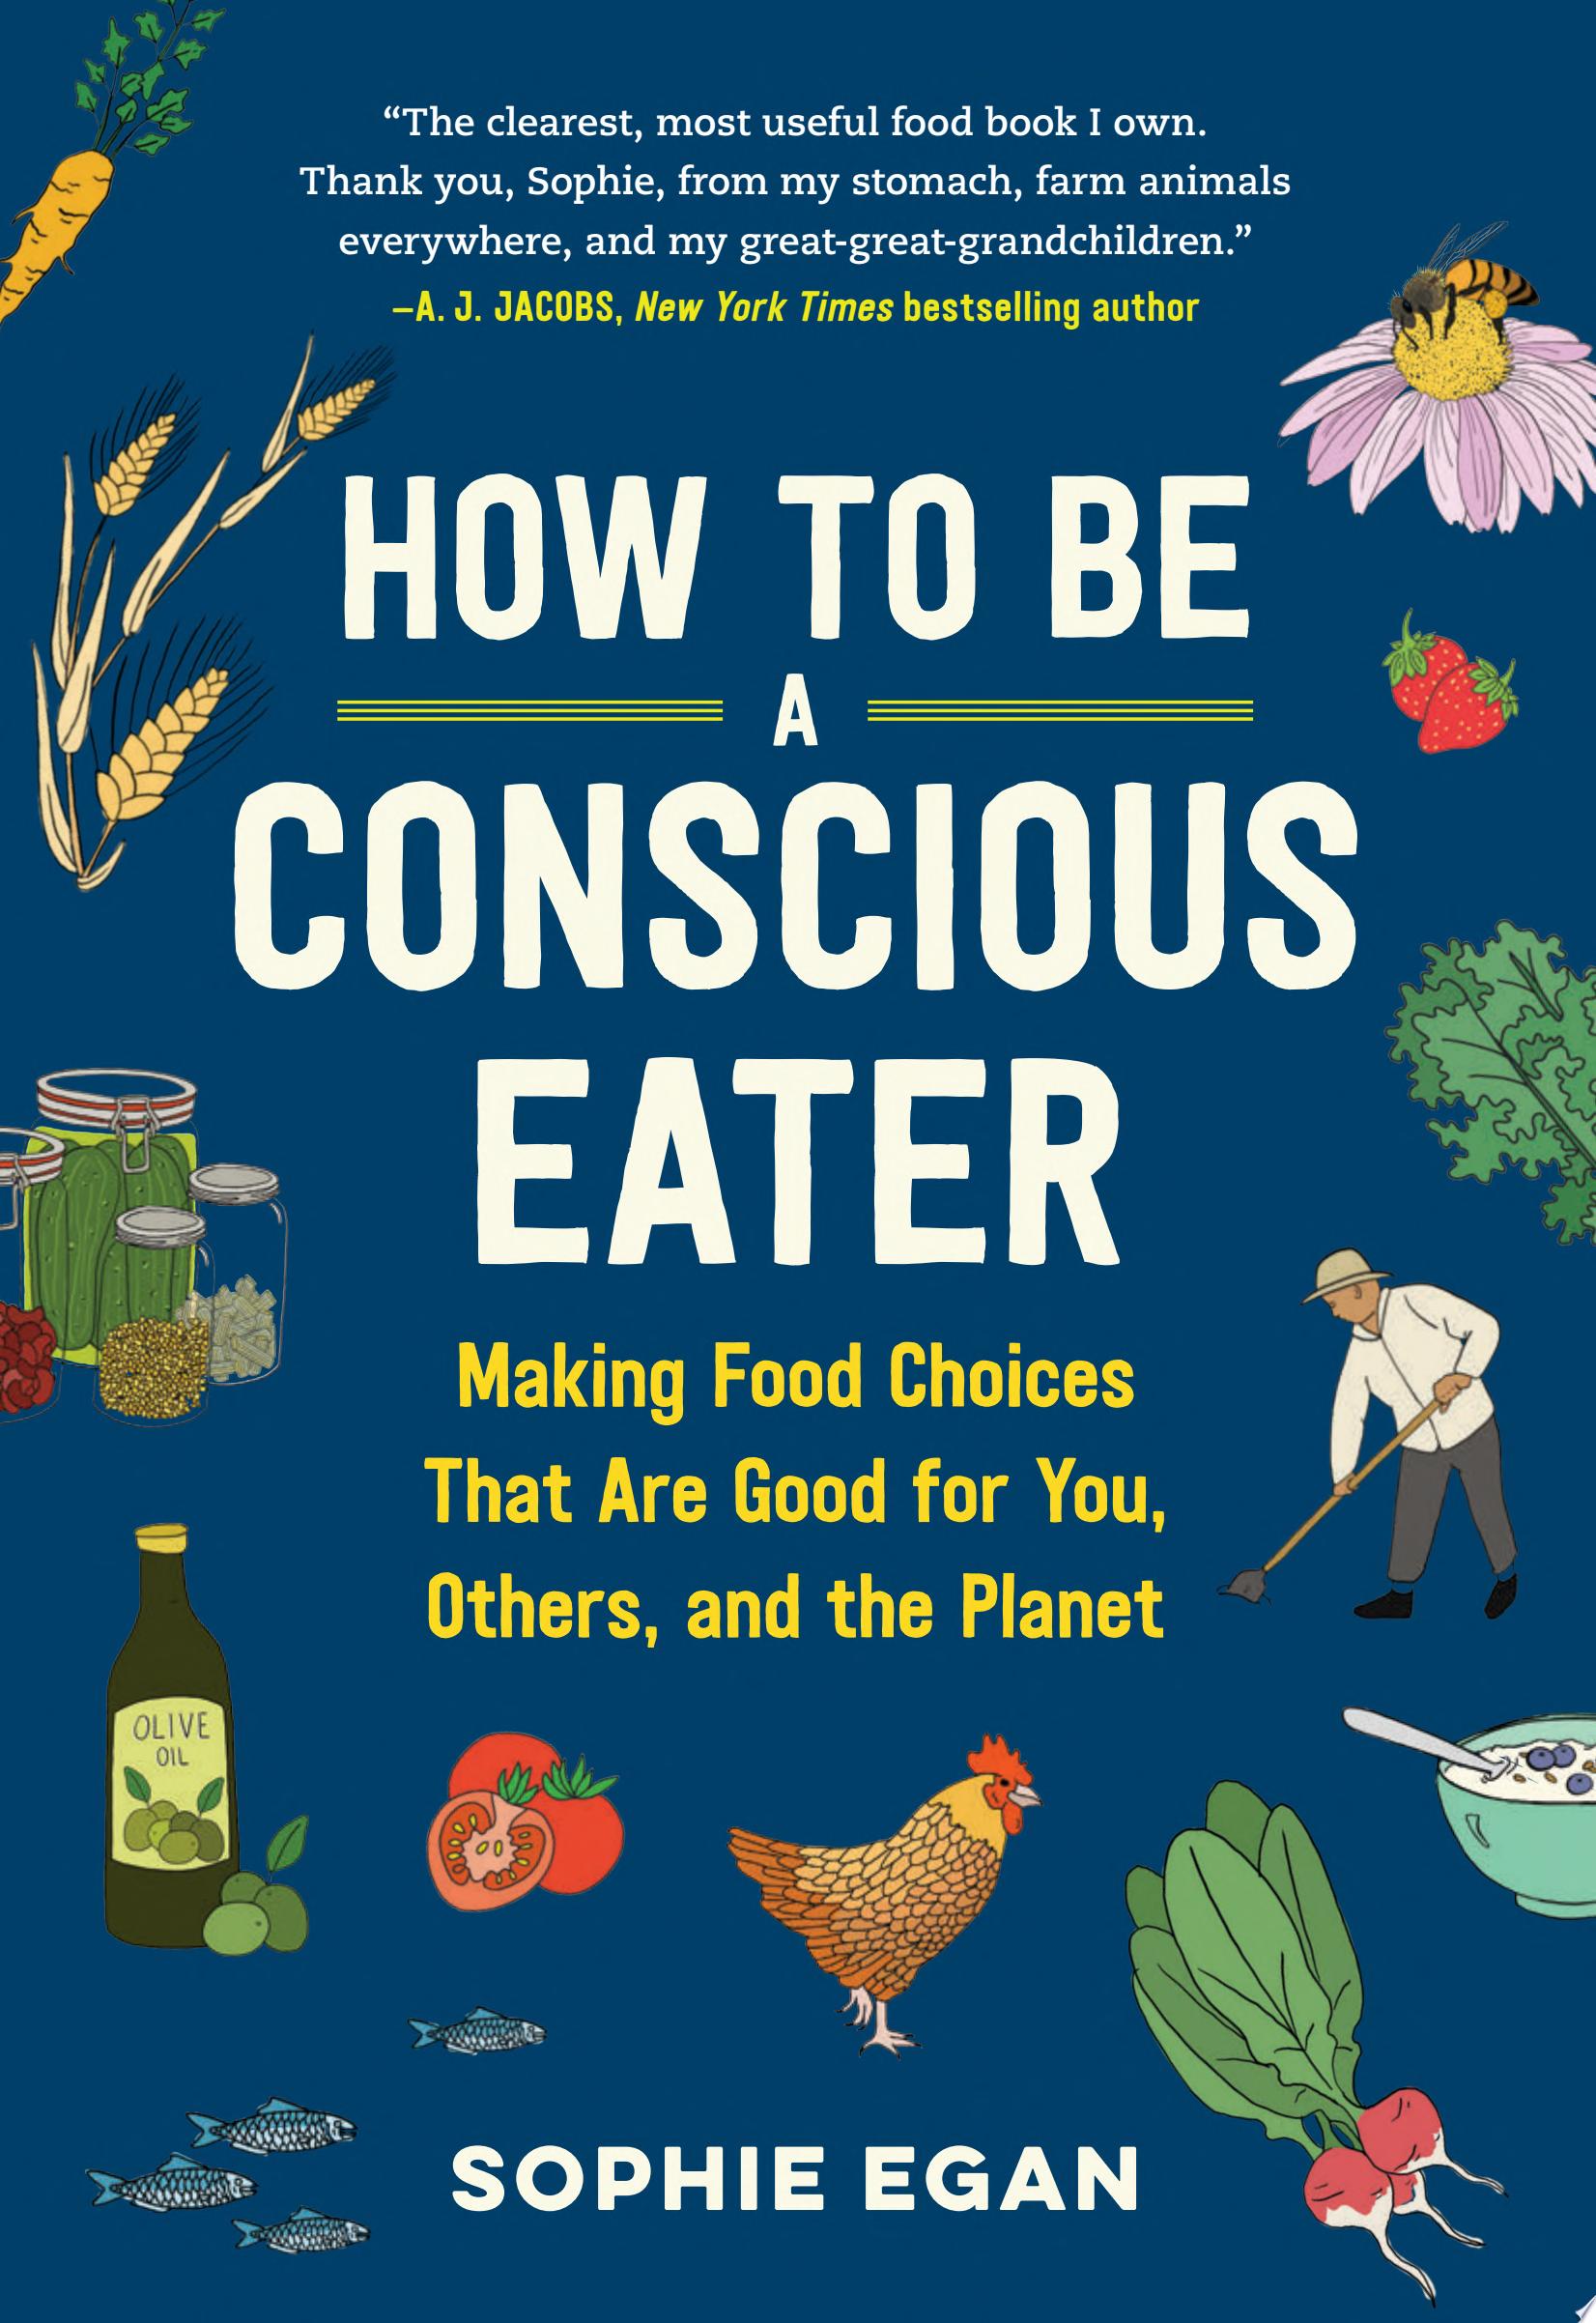 Image for "How to Be a Conscious Eater"